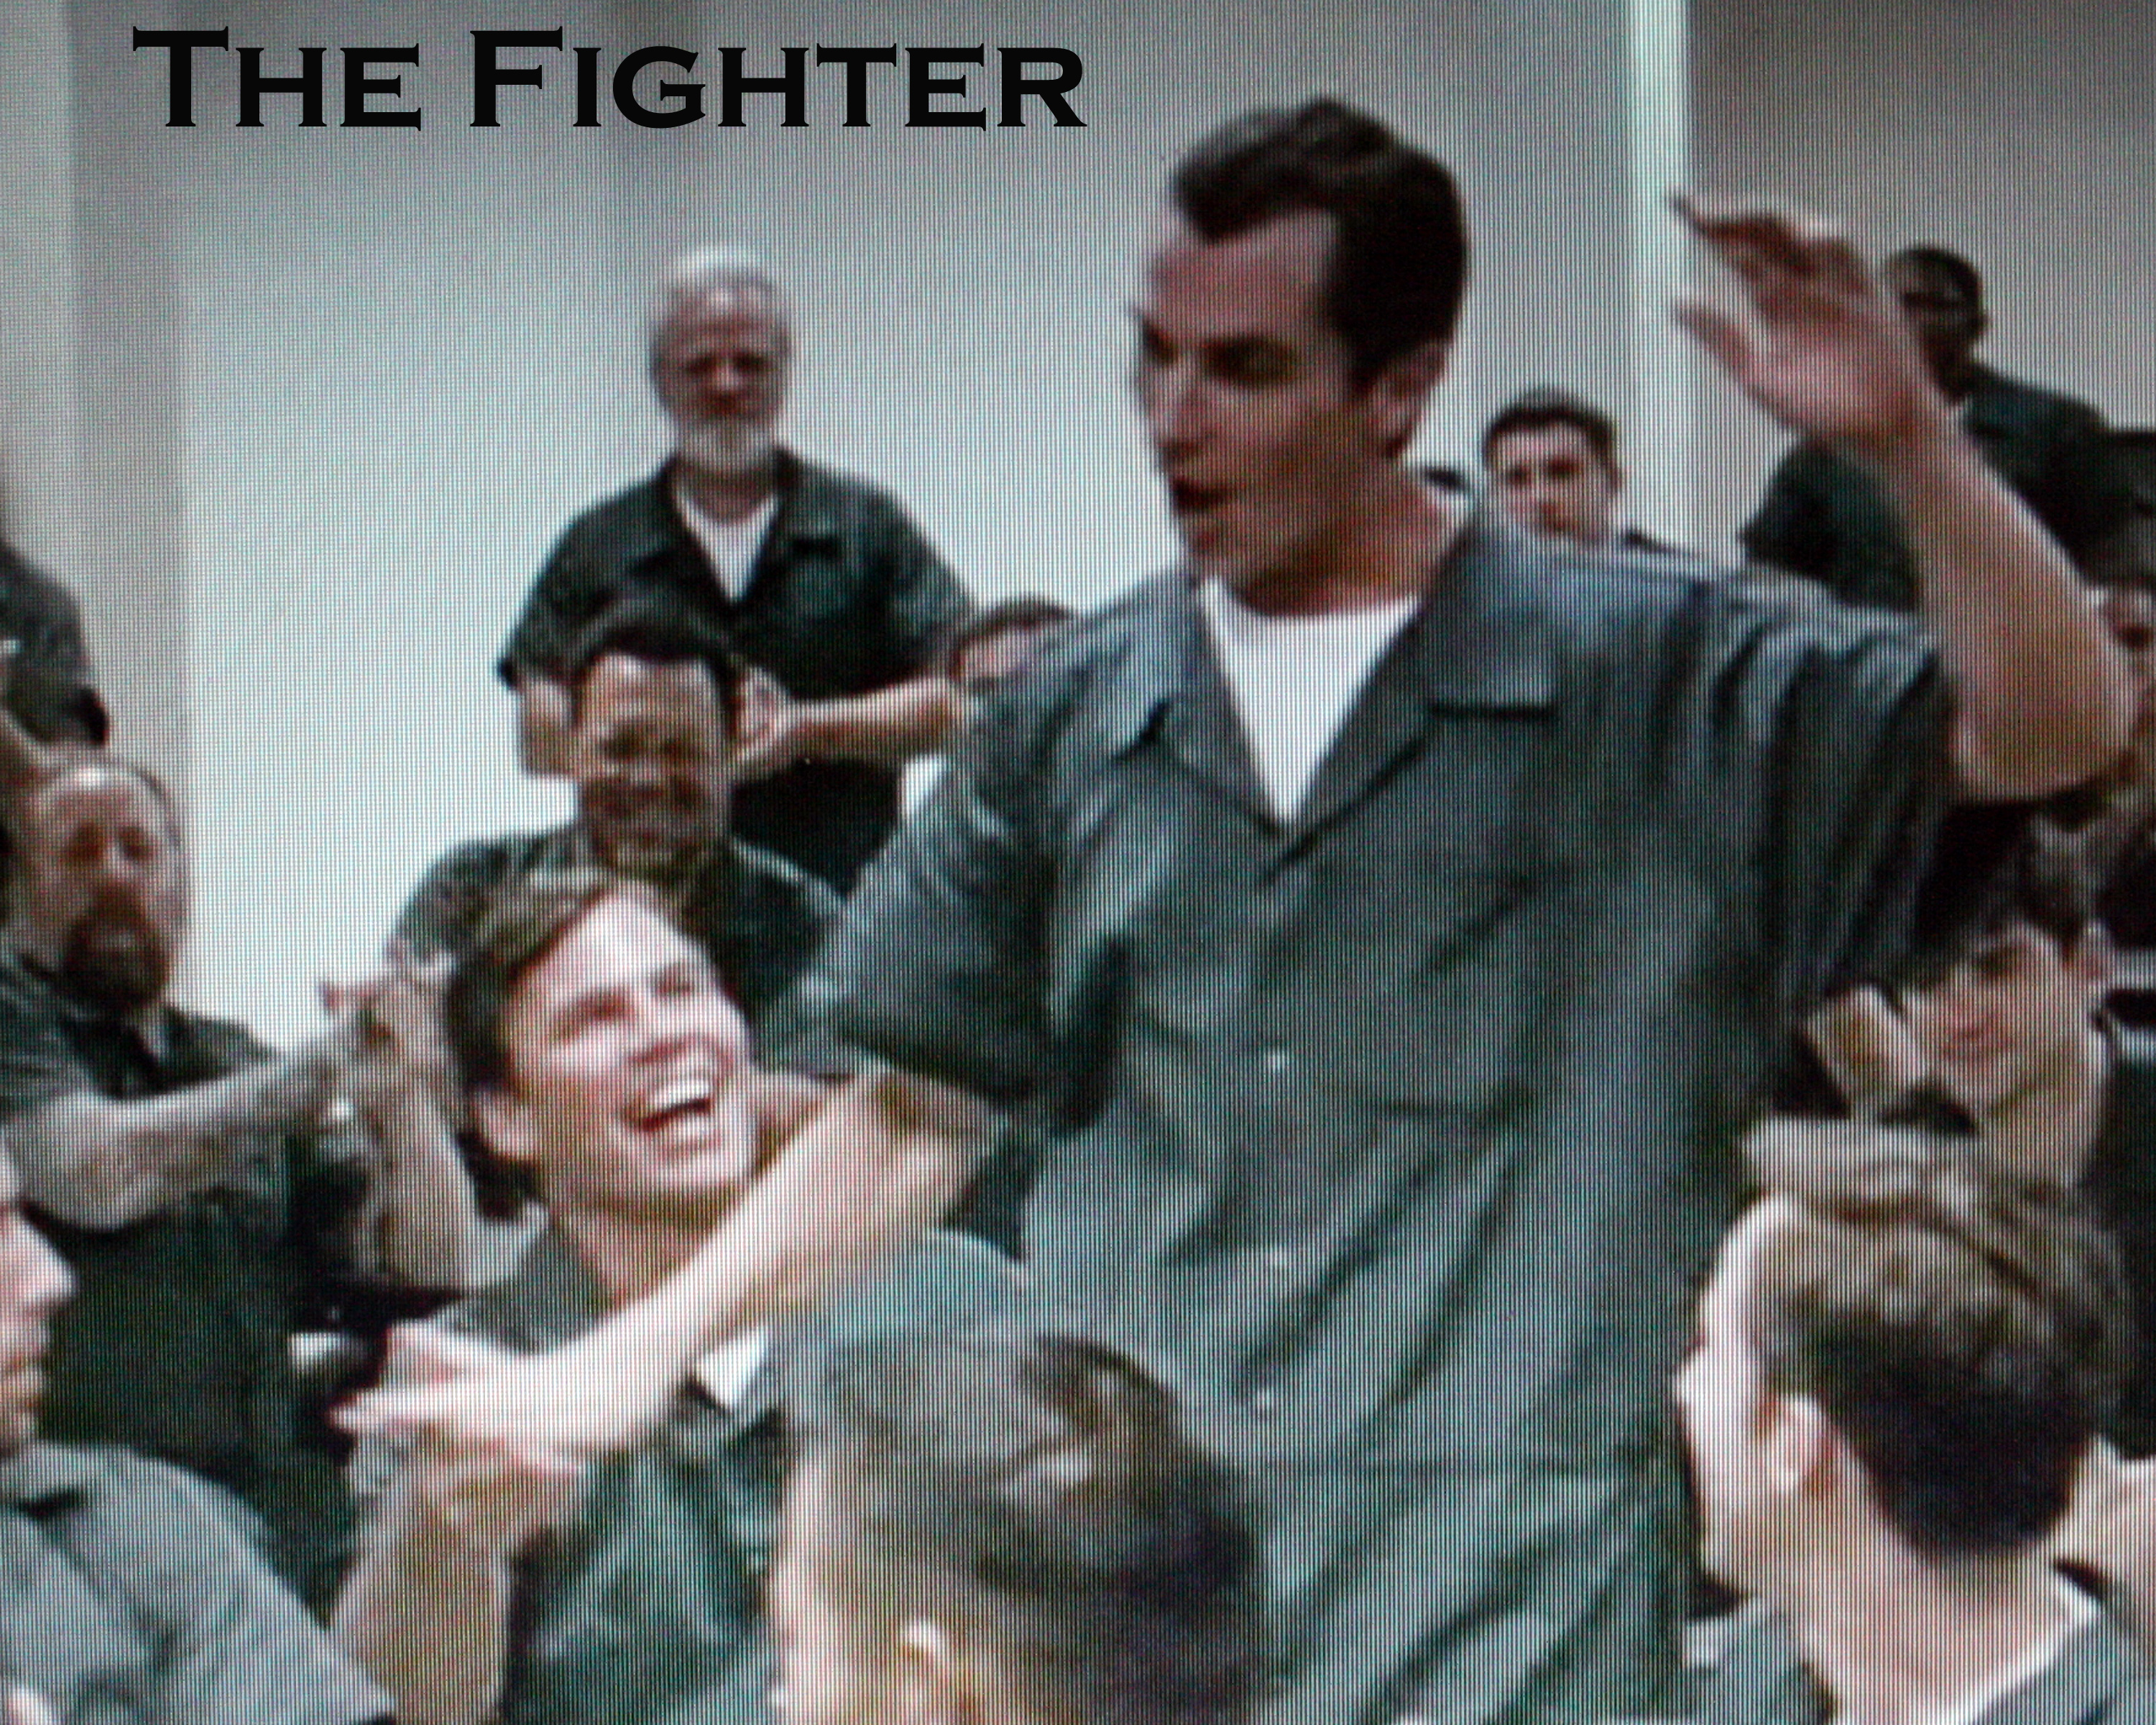 The Fighter starring Christian Bale in scene with Jeff Corazzini as inmate